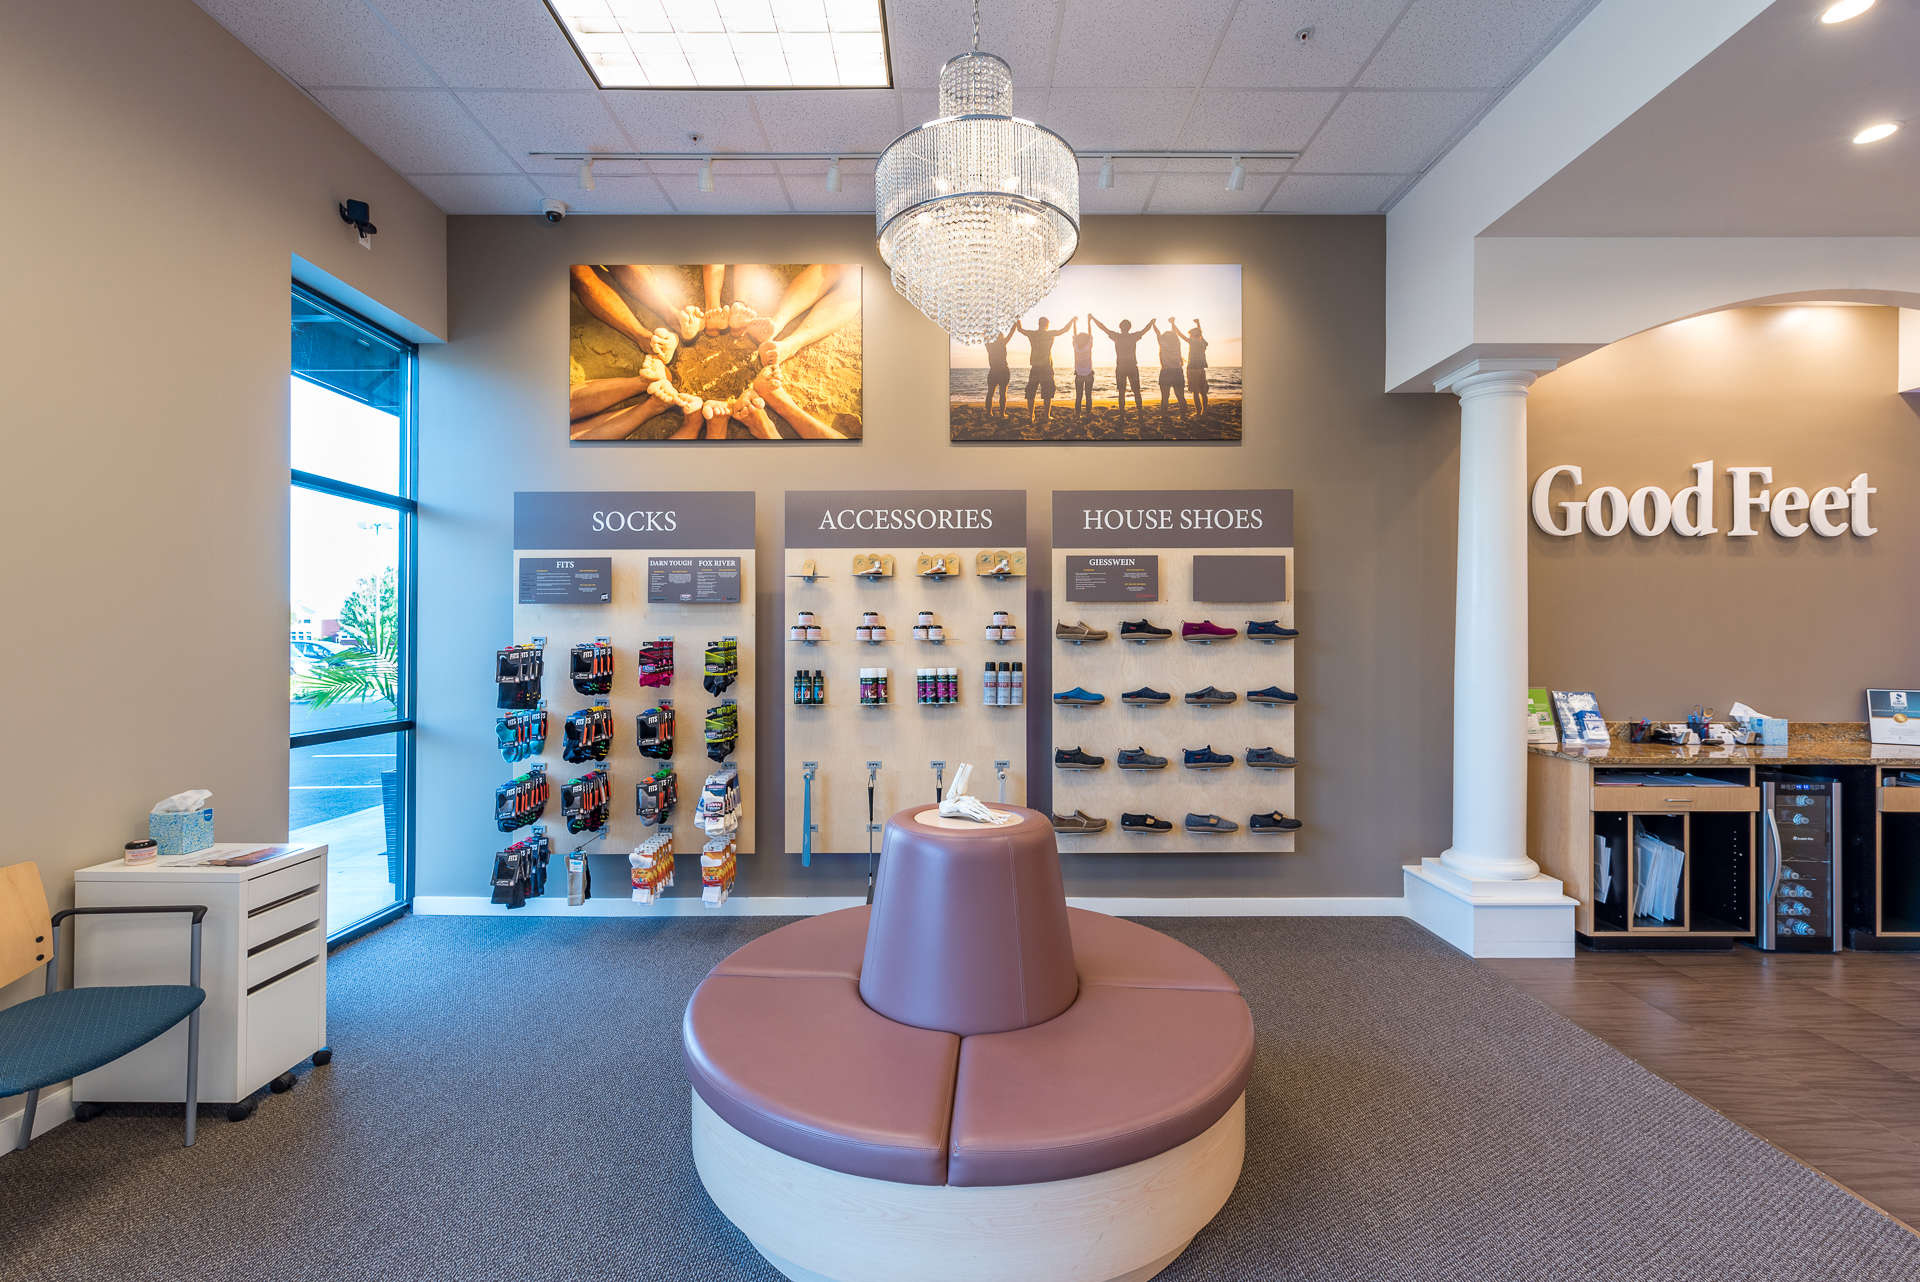 cost of insoles at good feet store